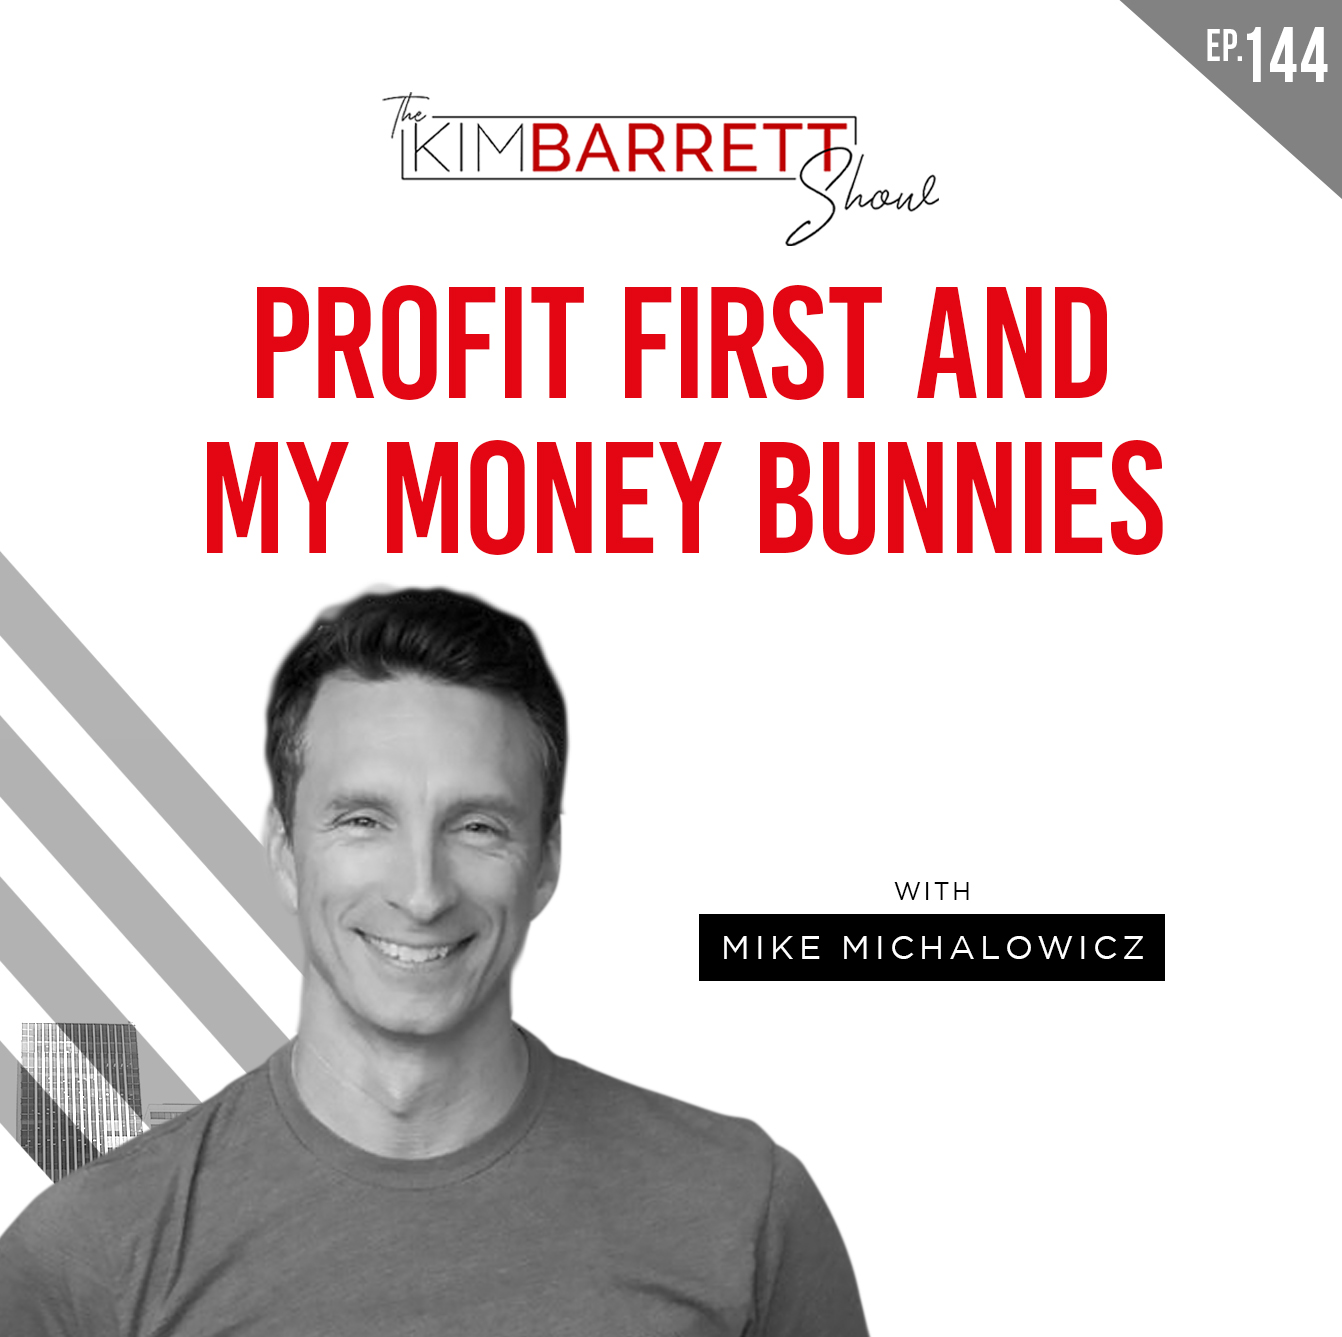 Profit First and My Money Bunnies with Mike Michalowicz